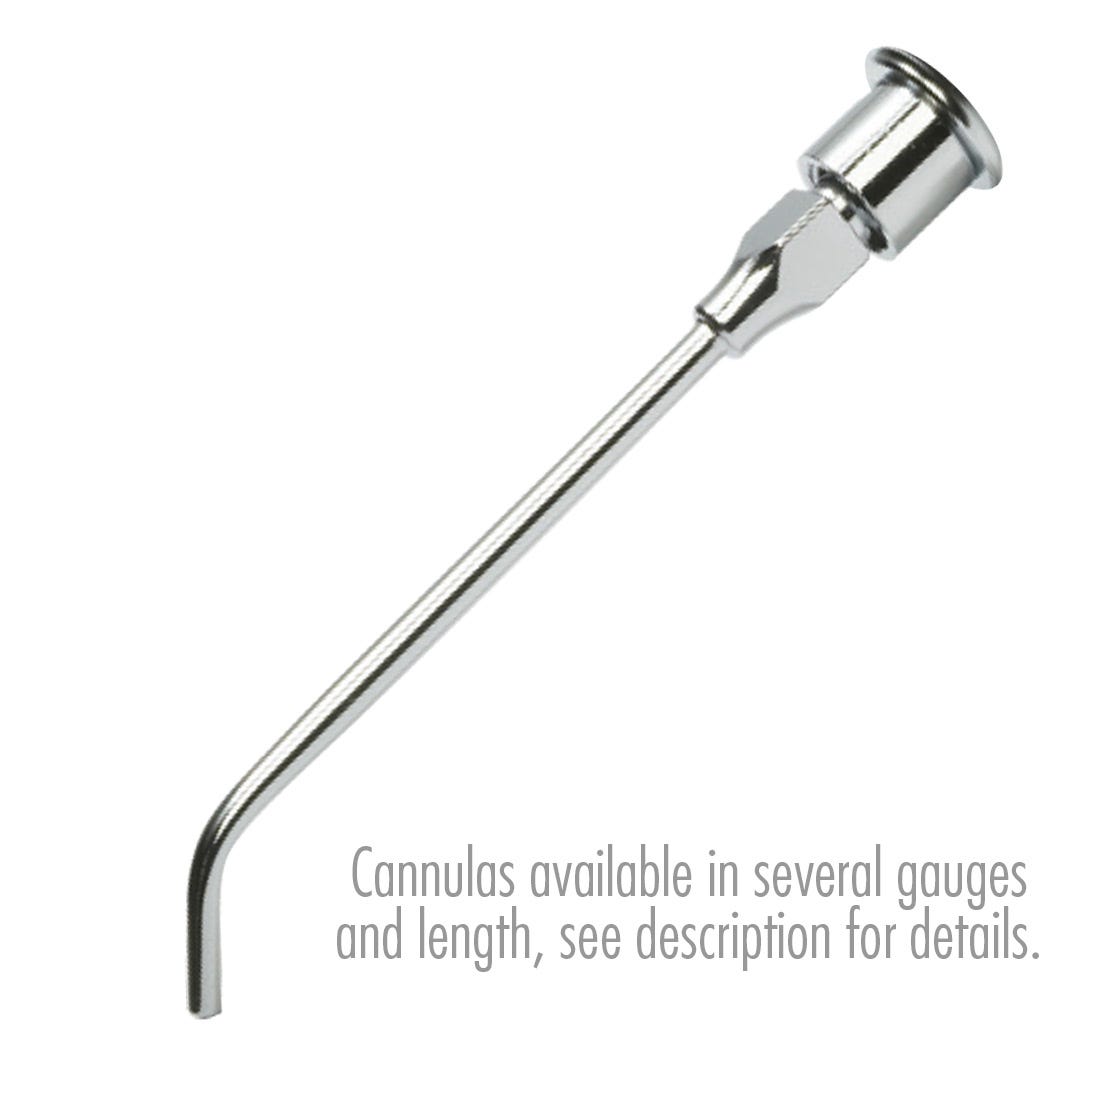 ACE Irrigation Cannula - Stainless Steel 18G x  1-1/4", 45 degree angle